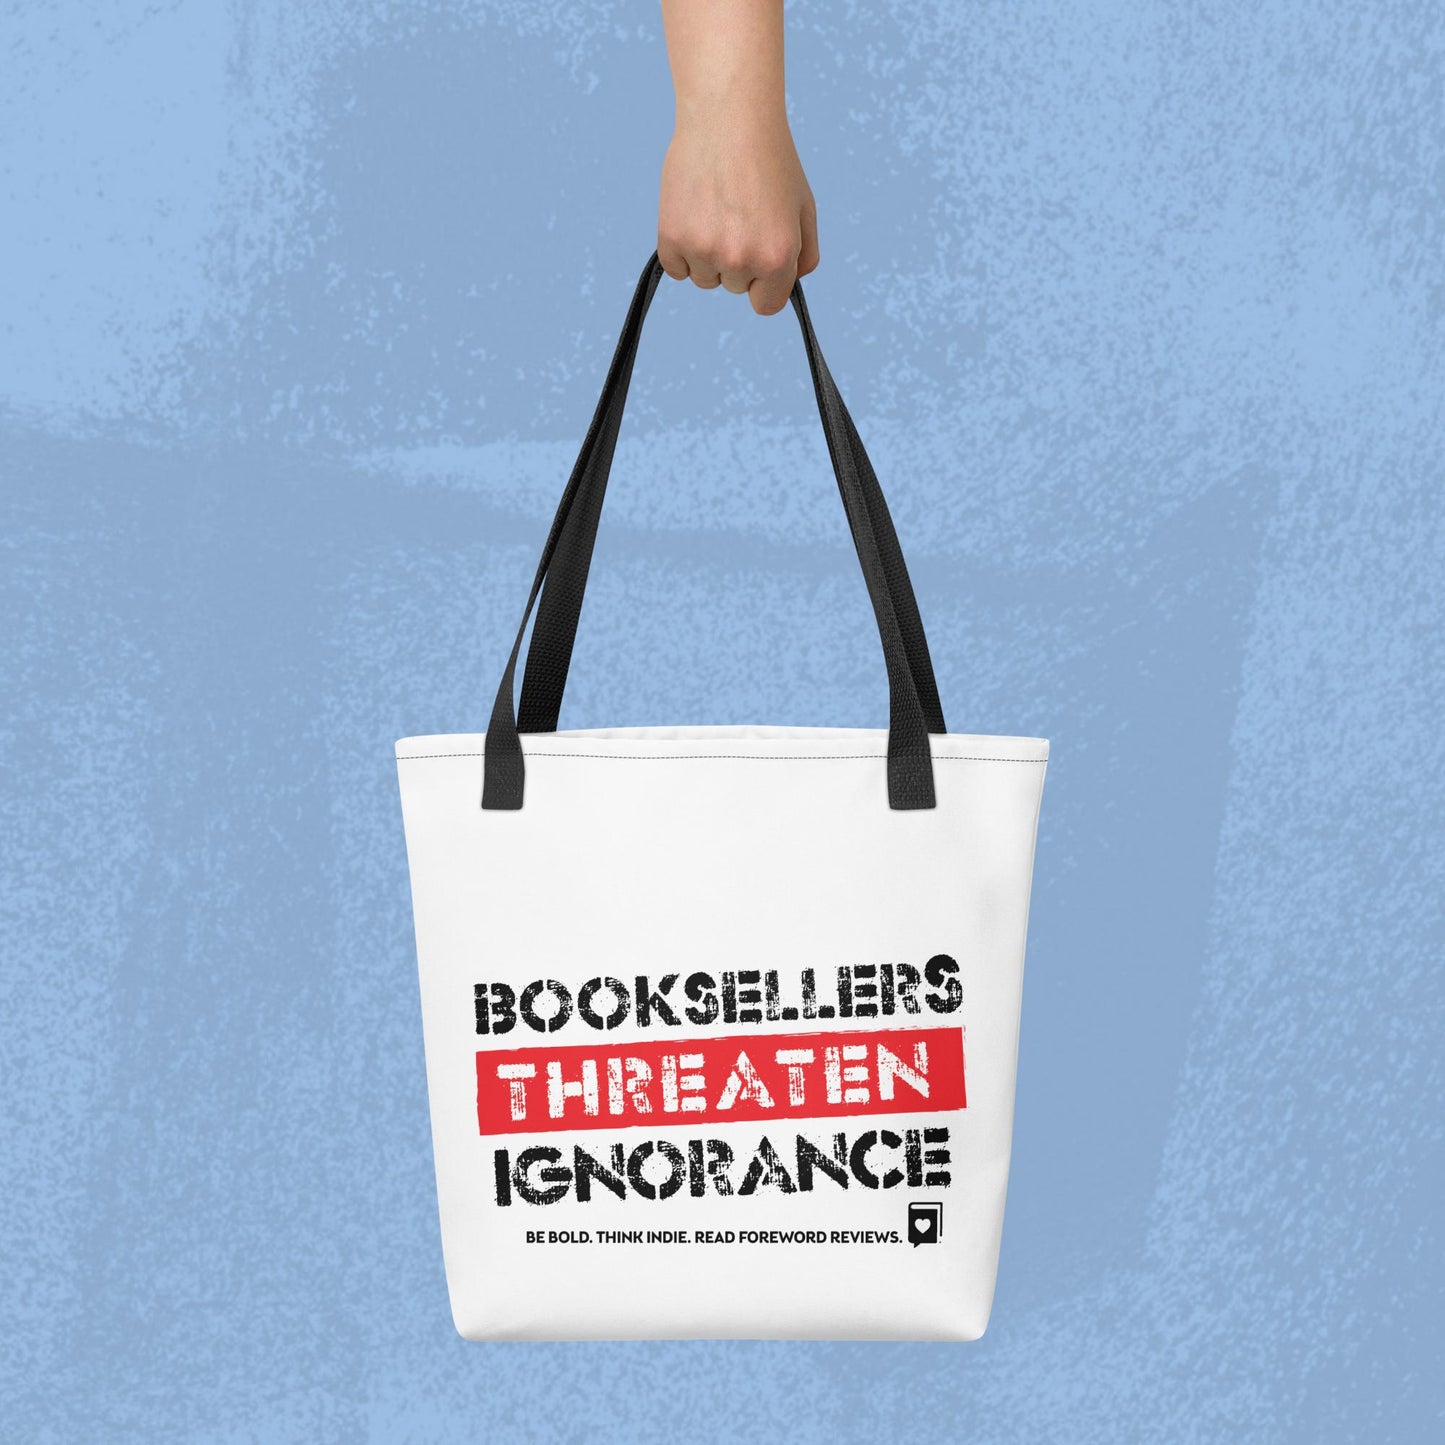 Booksellers Threaten Ignorance Tote bag